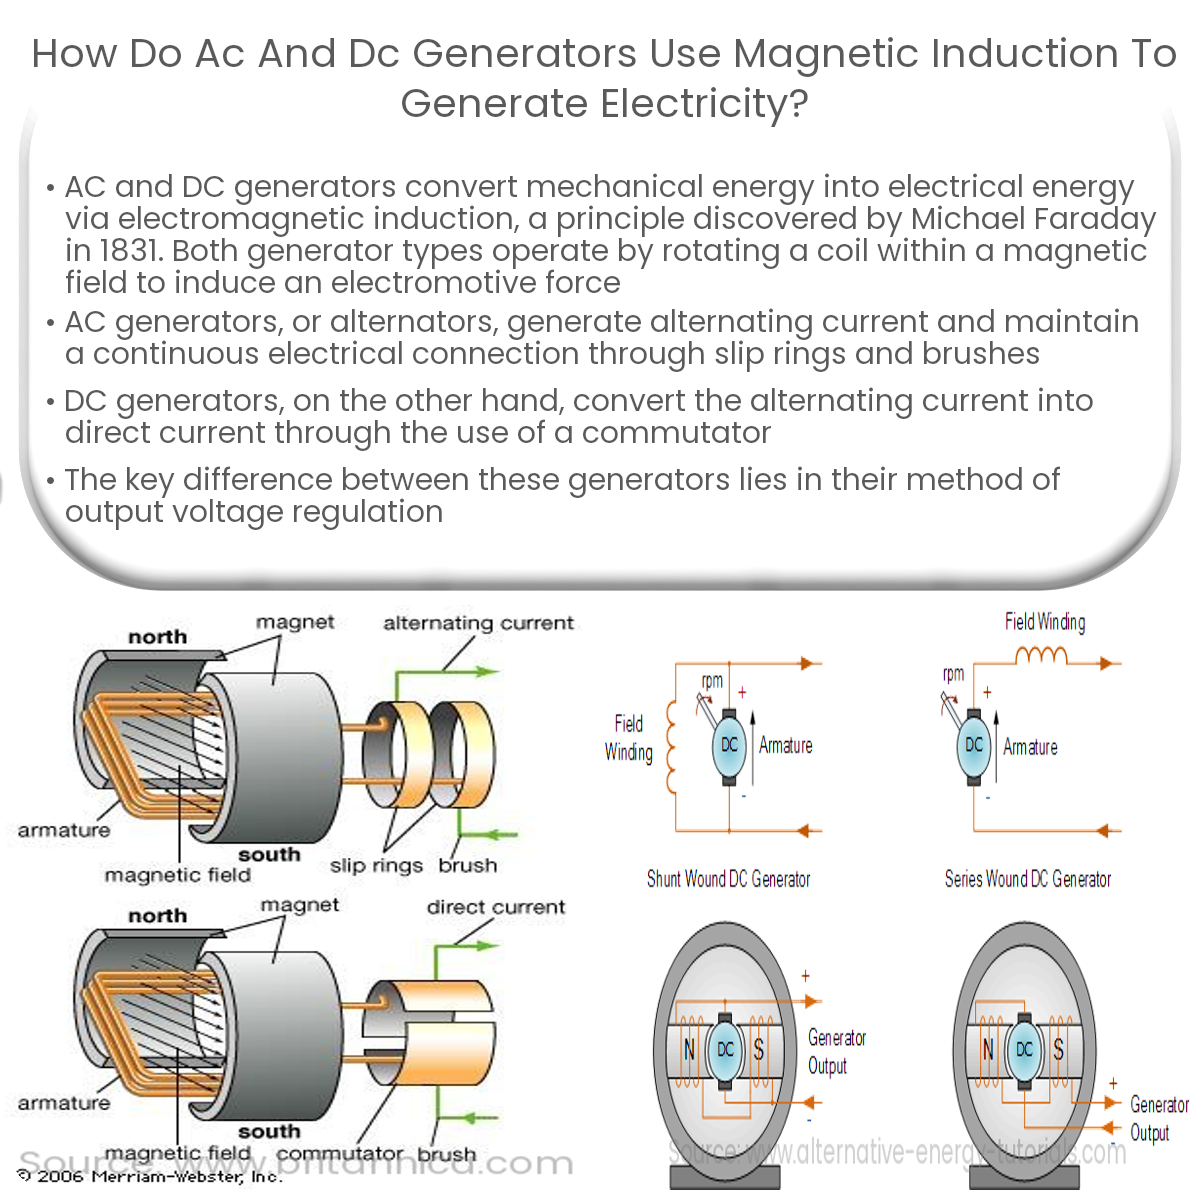 https://www.electricity-magnetism.org/wp-content/uploads/2023/06/how-do-ac-and-dc-generators-use-magnetic-induction-to-generate-electricity.png